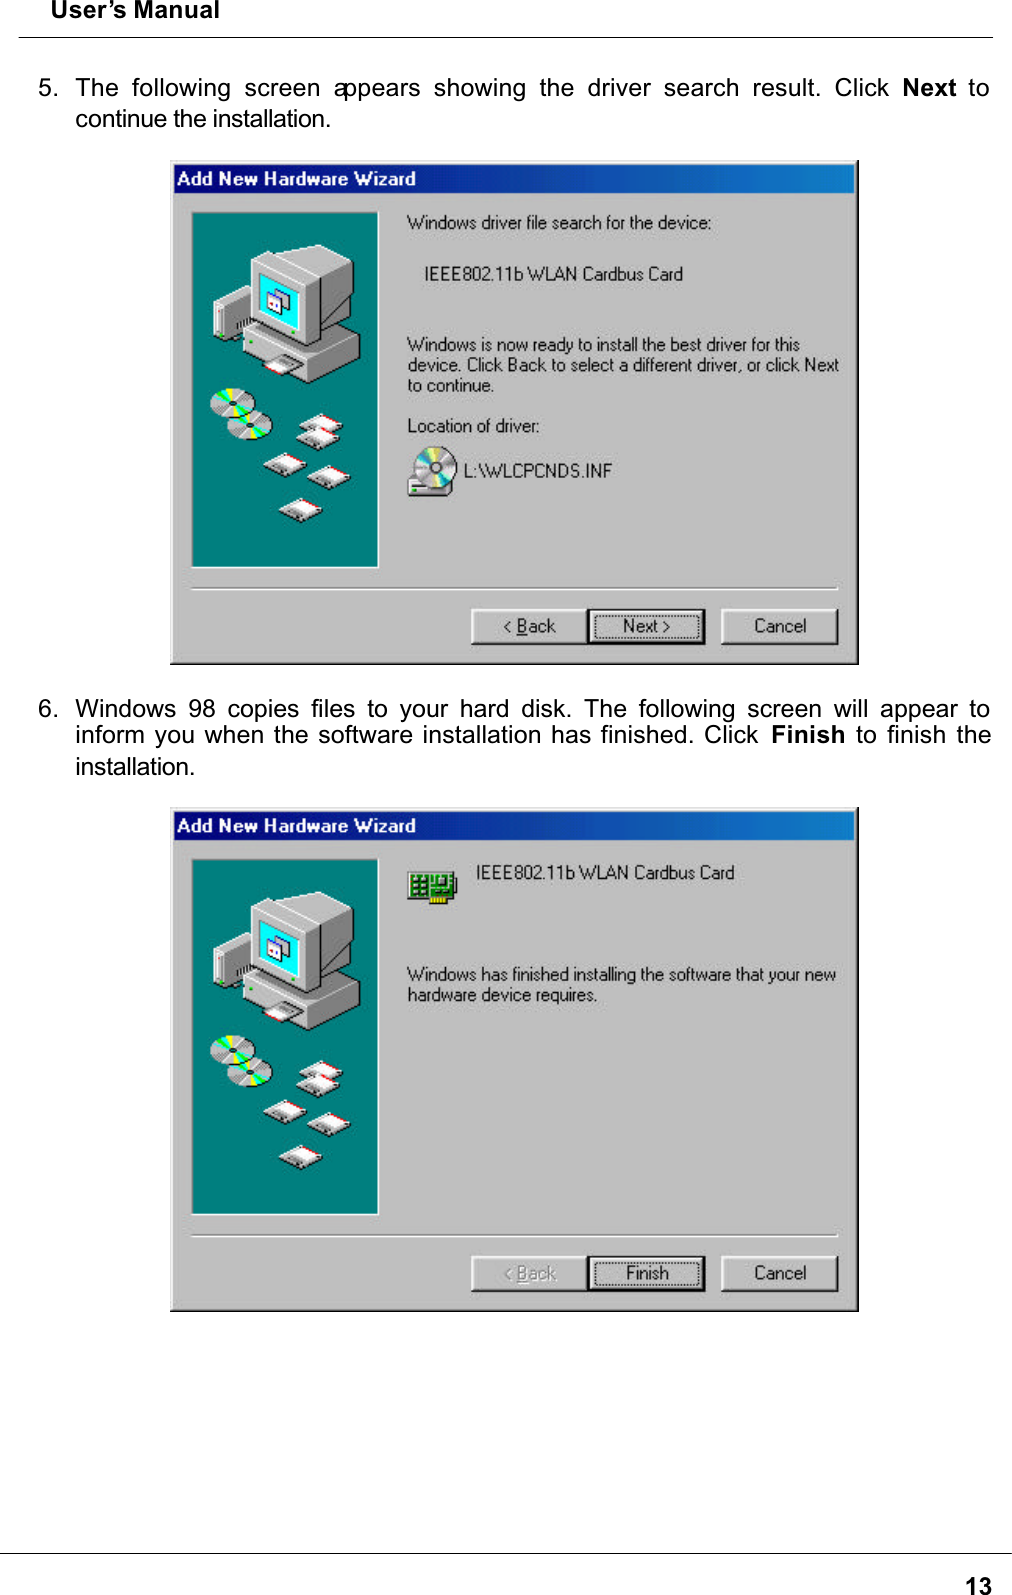  User’s Manual135. The following screen appears showing the driver search result. Click Next to continue the installation. 6. Windows 98 copies files to your hard disk. The following screen will appear to inform you when the software installation has finished. Click  Finish to finish the installation.